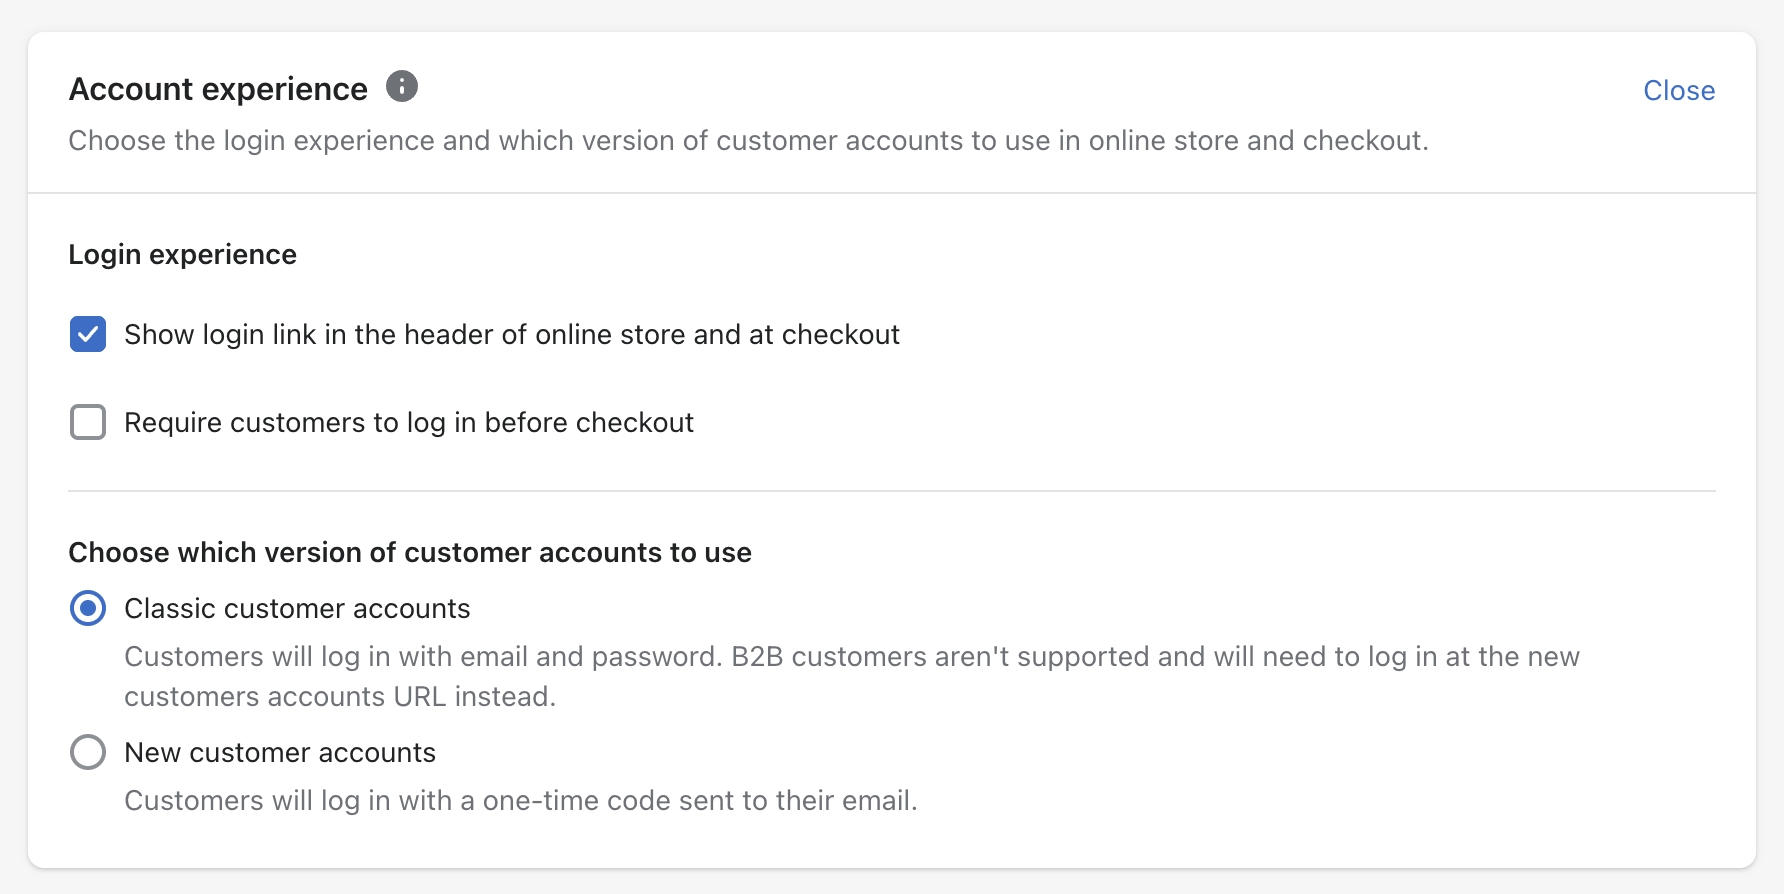 Account experience settings in the Shopify admin.